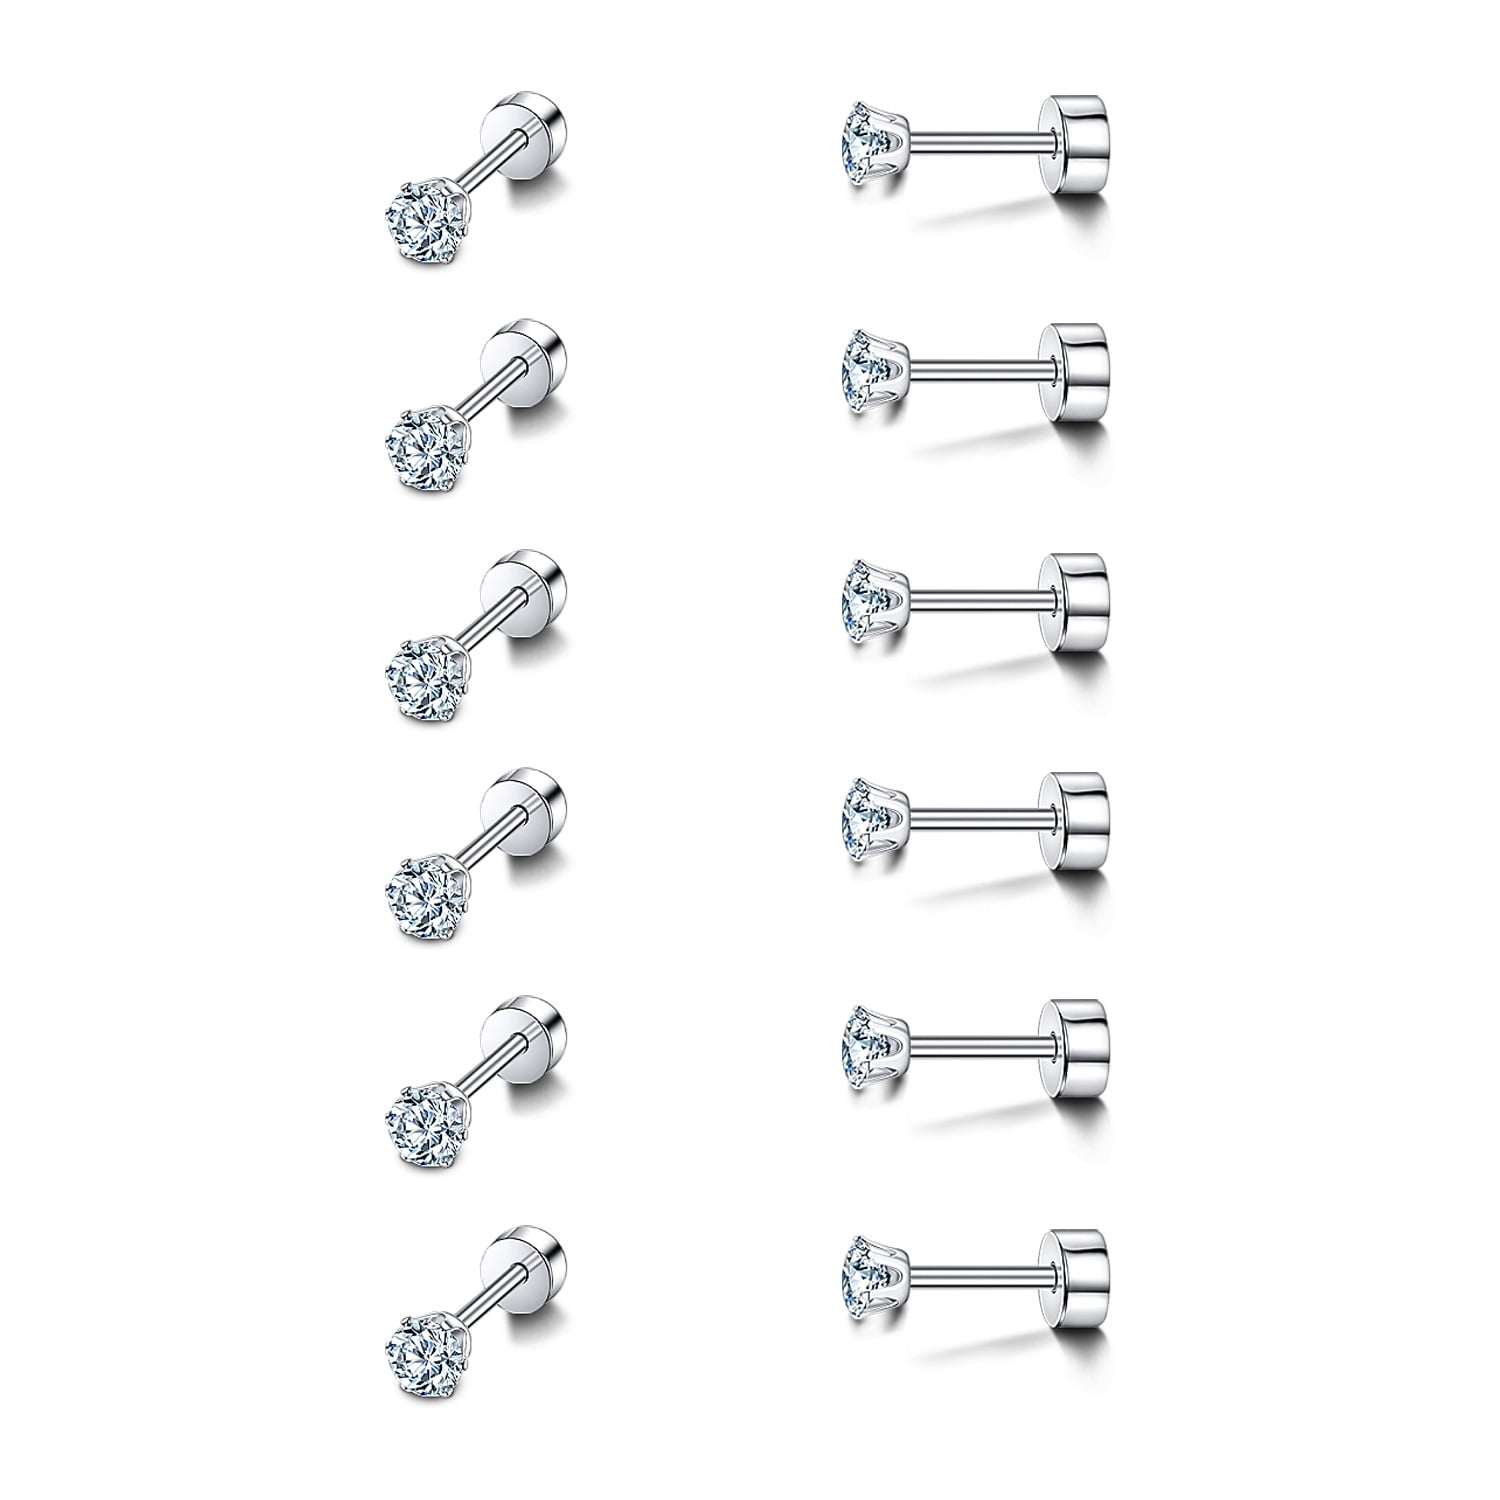 SAILIMUE 23 Pairs Surgical Steel Stud Earrings for Women Men Hypoallergenic Tiny Cartilage Earrings CZ Flat Back Earrings Hoops Set Tragus Daith